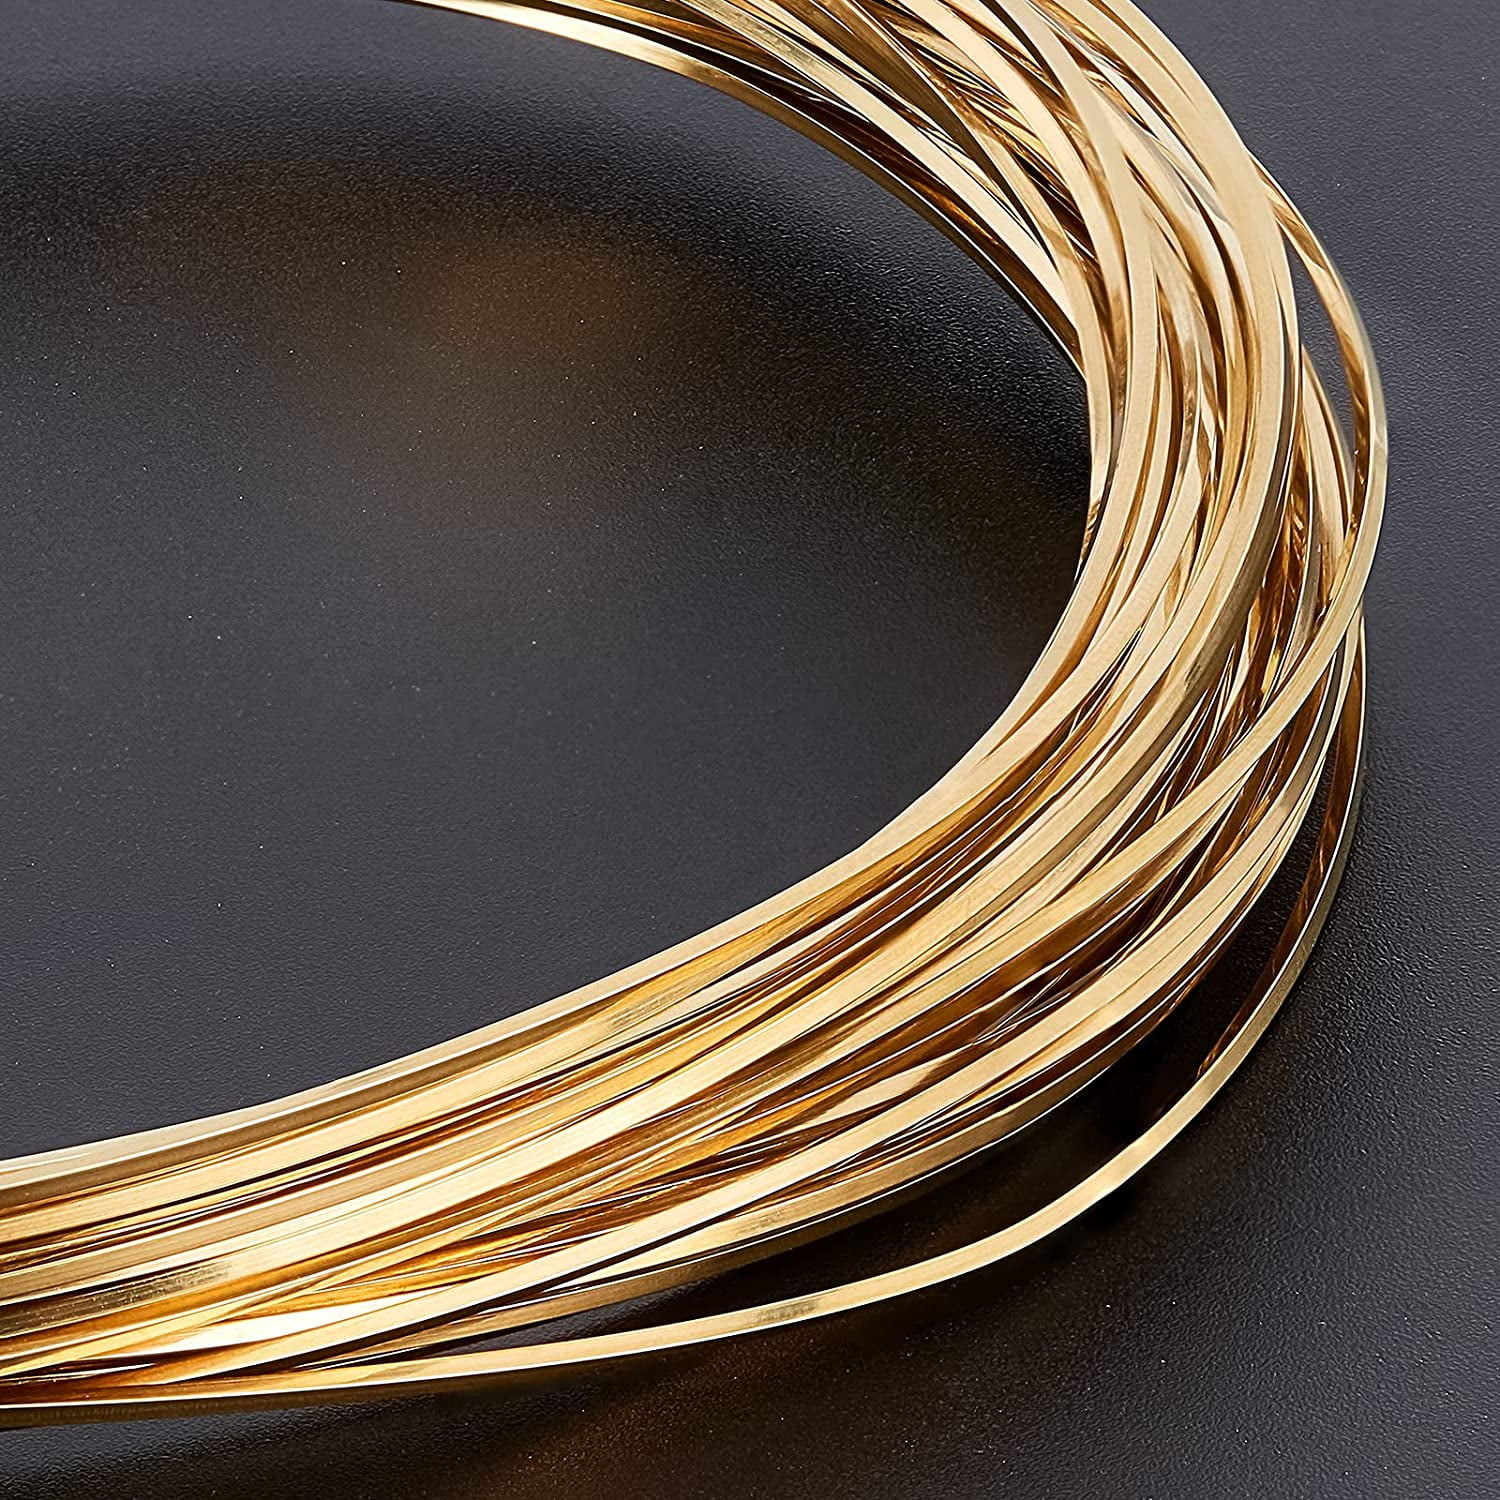 20 Gauge Bare Copper Wire Solid Copper Wire for Jewelry Craft Making  33-Feet/11-Yard 